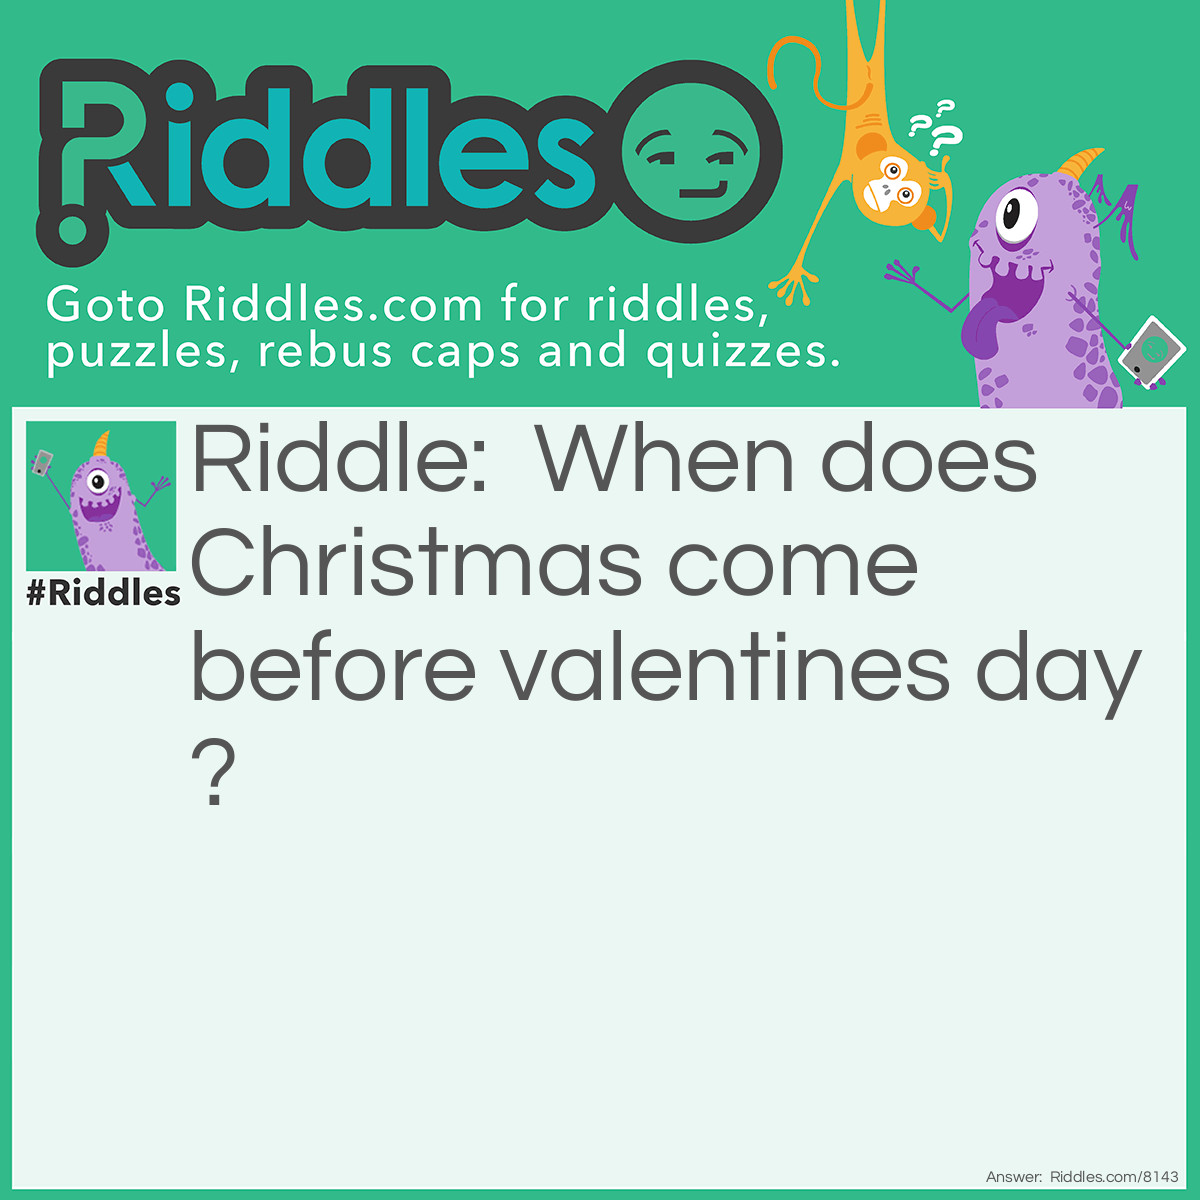 Riddle: When does Christmas come before valentines day? Answer: In a Dictionary.